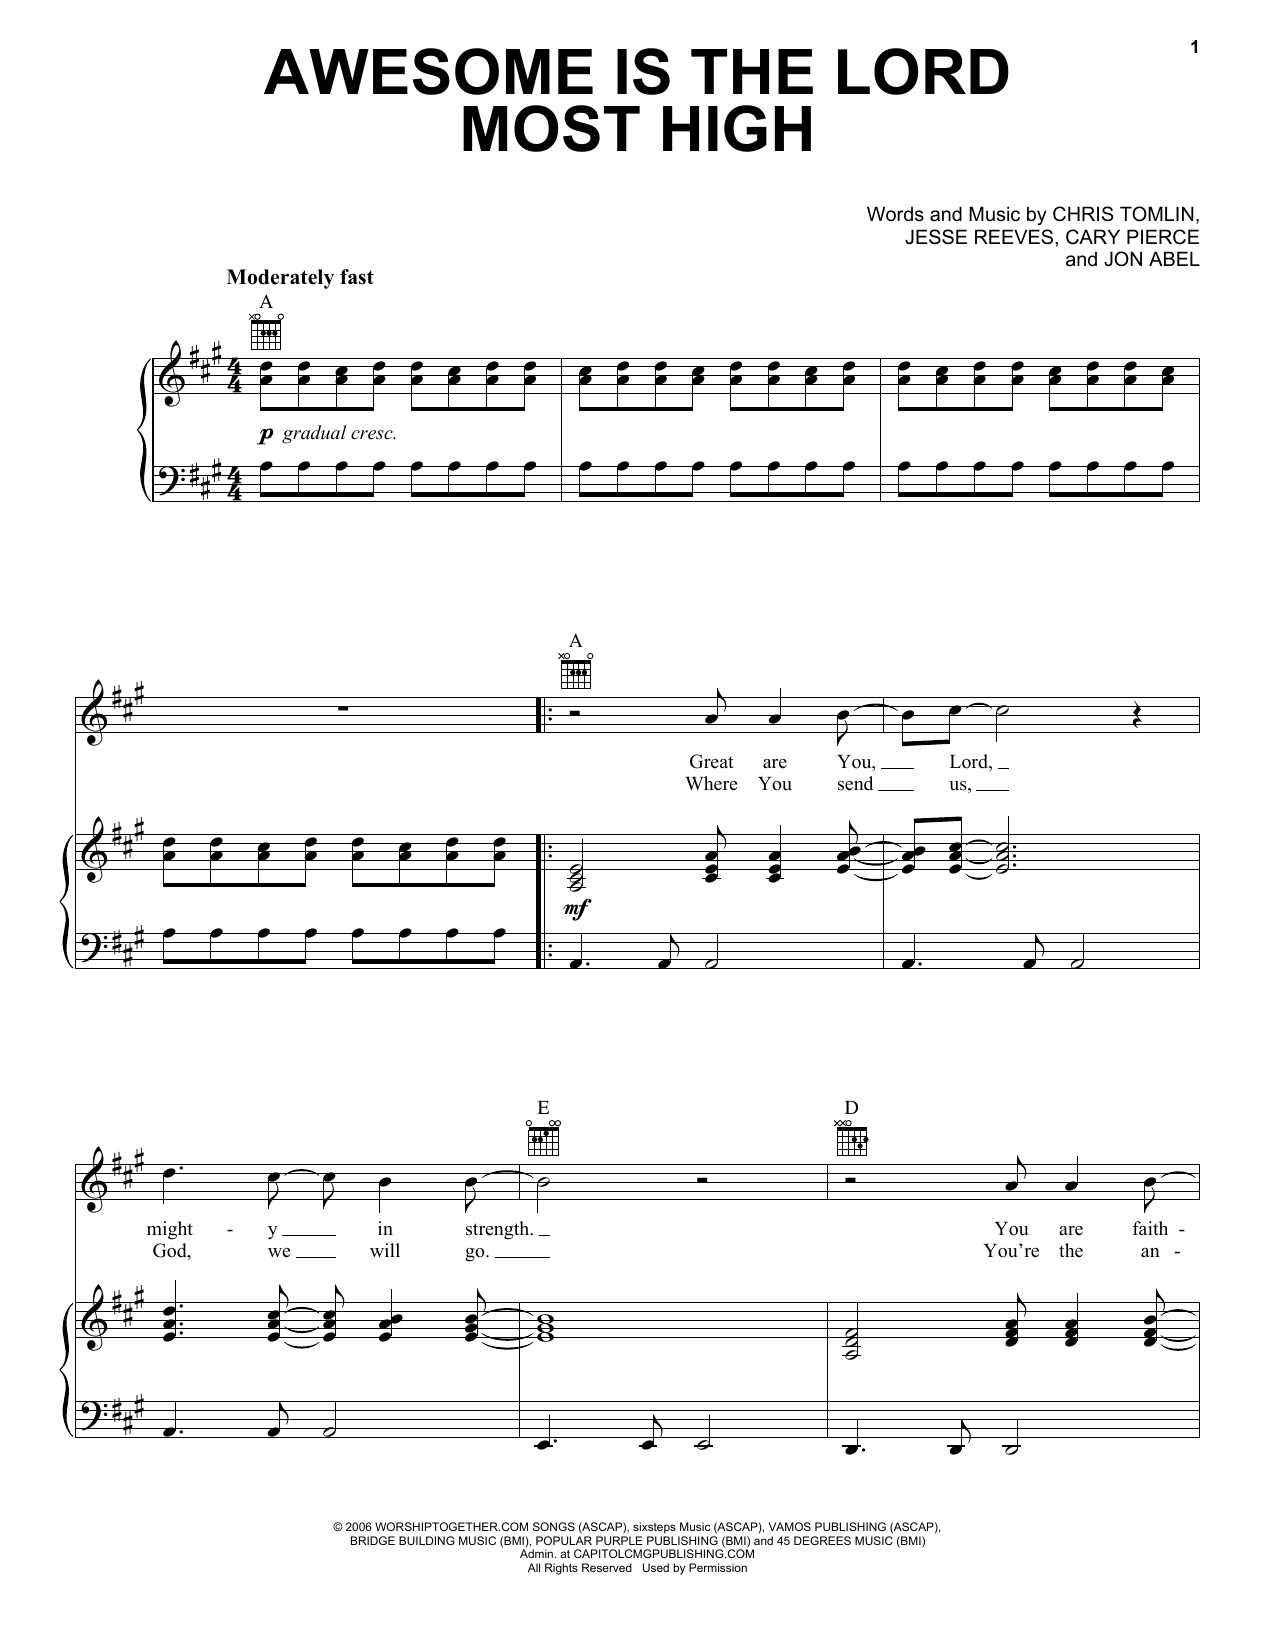 Download Chris Tomlin Awesome Is The Lord Most High Sheet Music